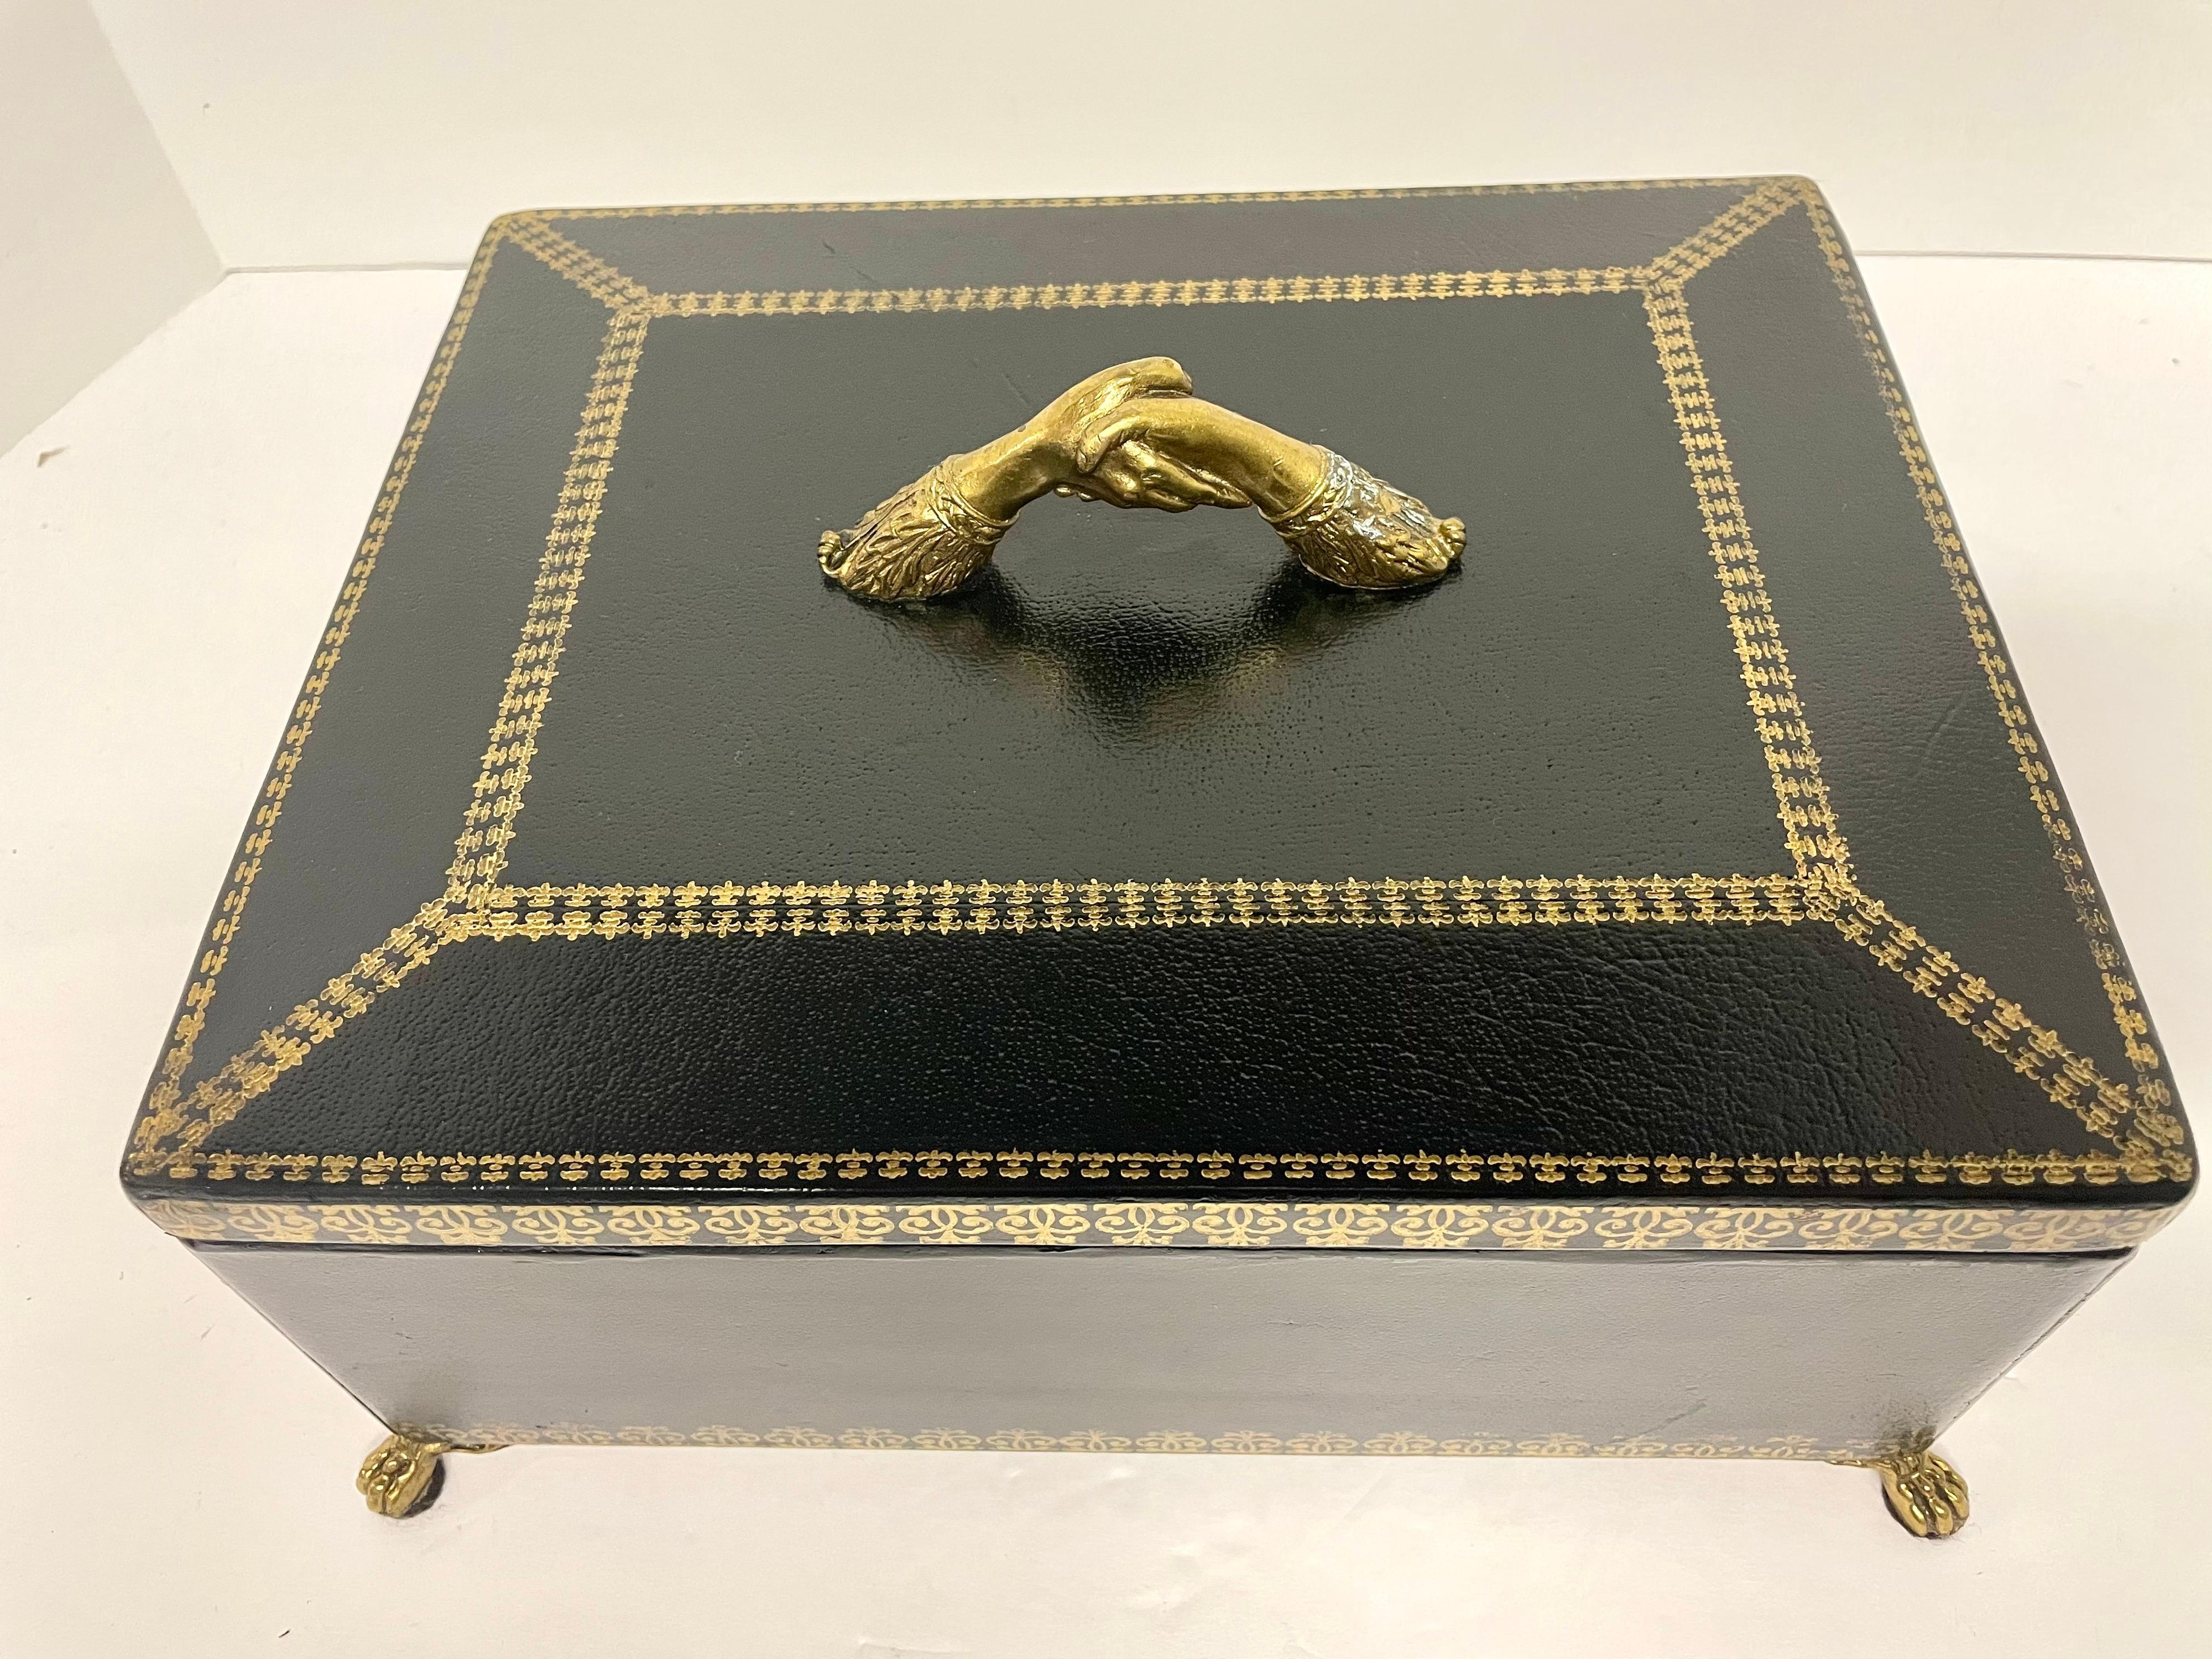 Maitland Smith black leather footed box with tags on bottom. Bronze feet, handshake handle on top. Marked 173 on bottom. From an estate in Charlottesville, VA.